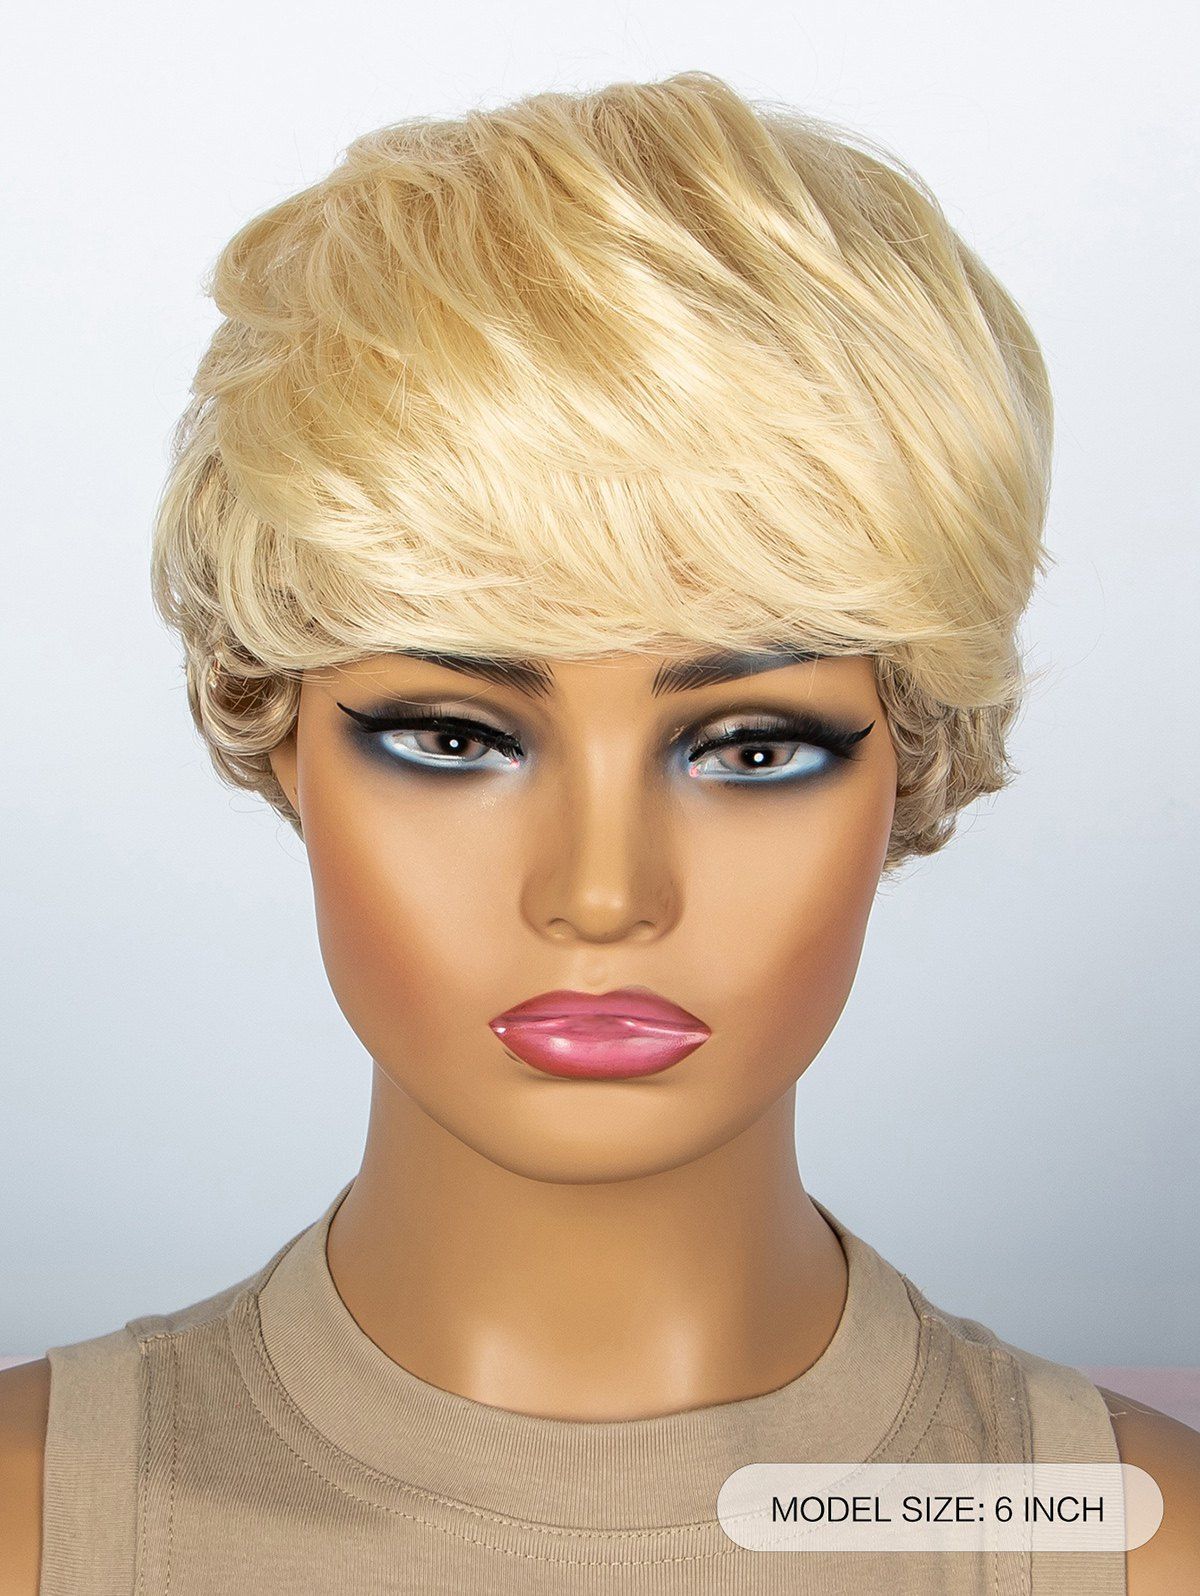 Short Side Bang Layered Two Tone Curly Pixie Cut Heat Resistant Synthetic Wig - GOLDEN 6INCH